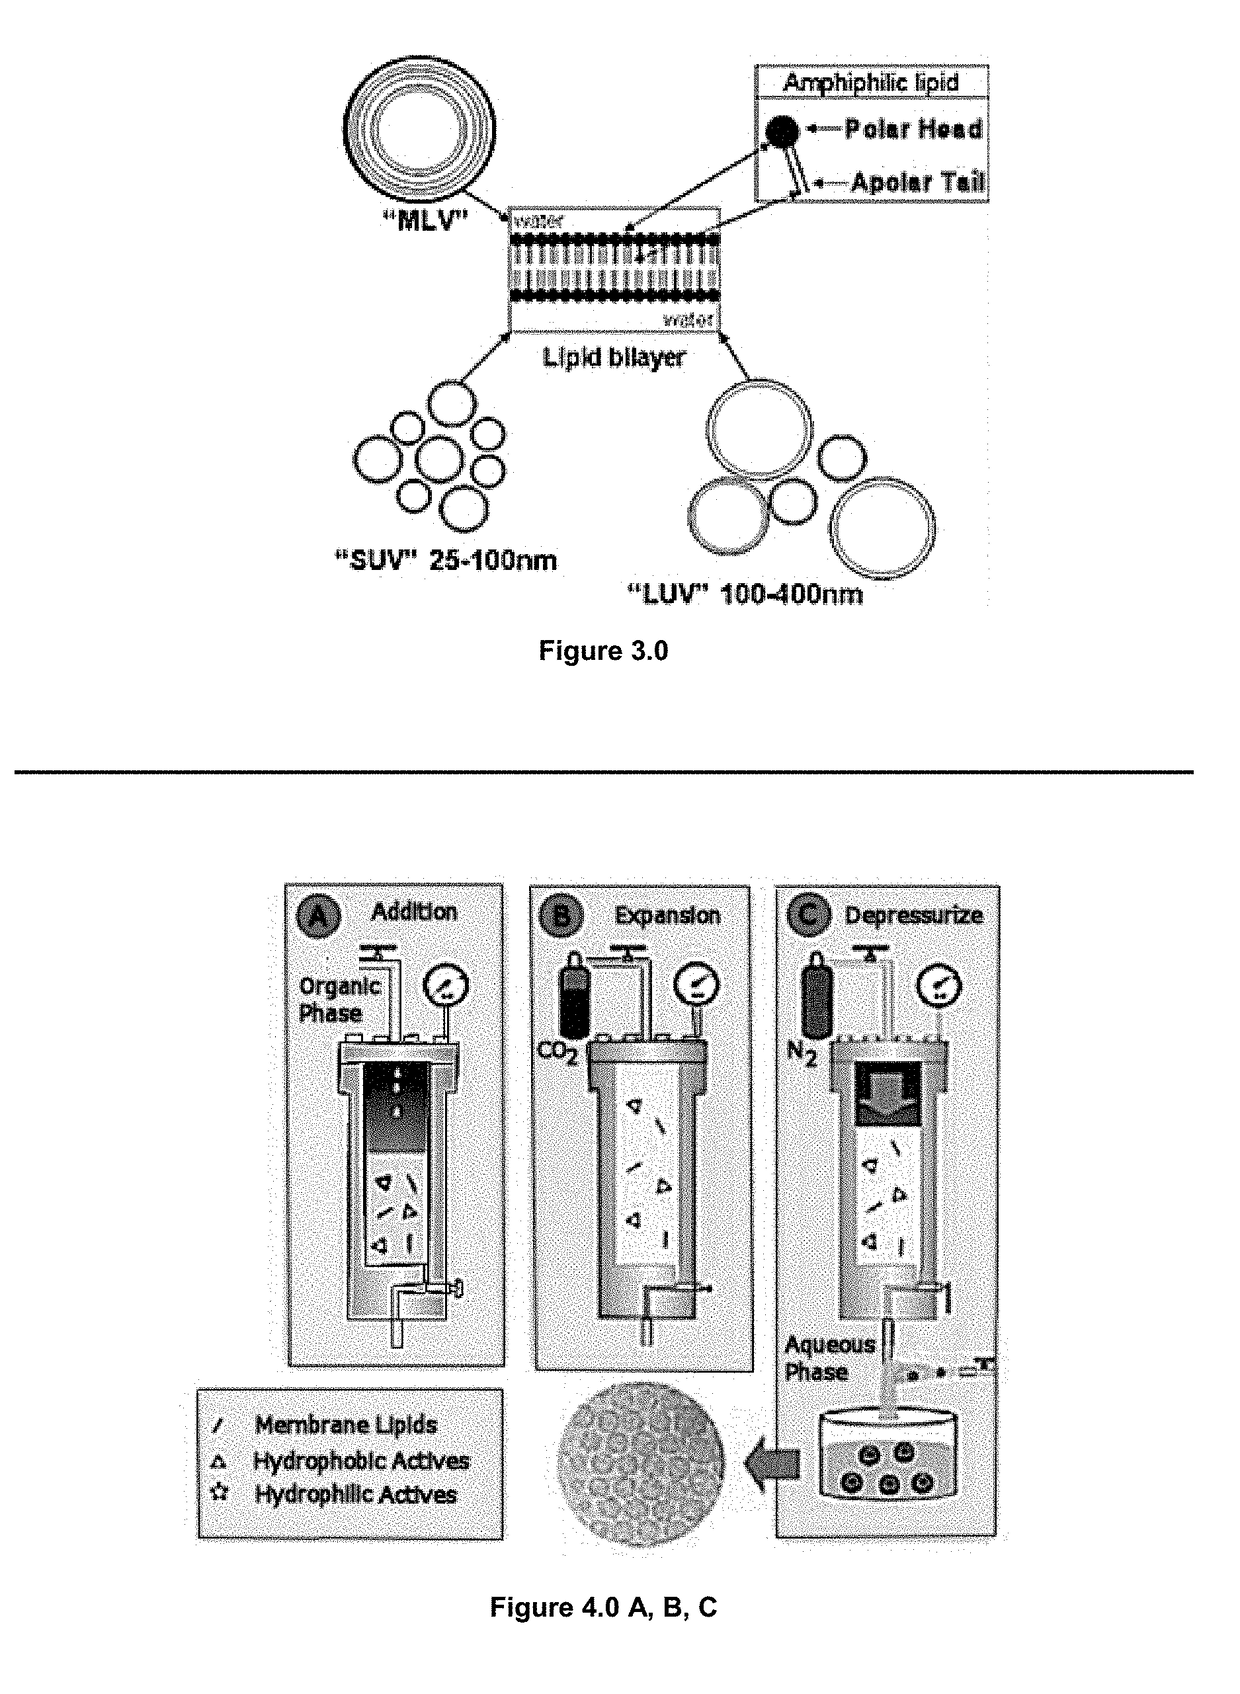 Apparatus and Method for Preparing Cosmeceutical Ingredients Containing Epi-Dermal Delivery Mechanisms